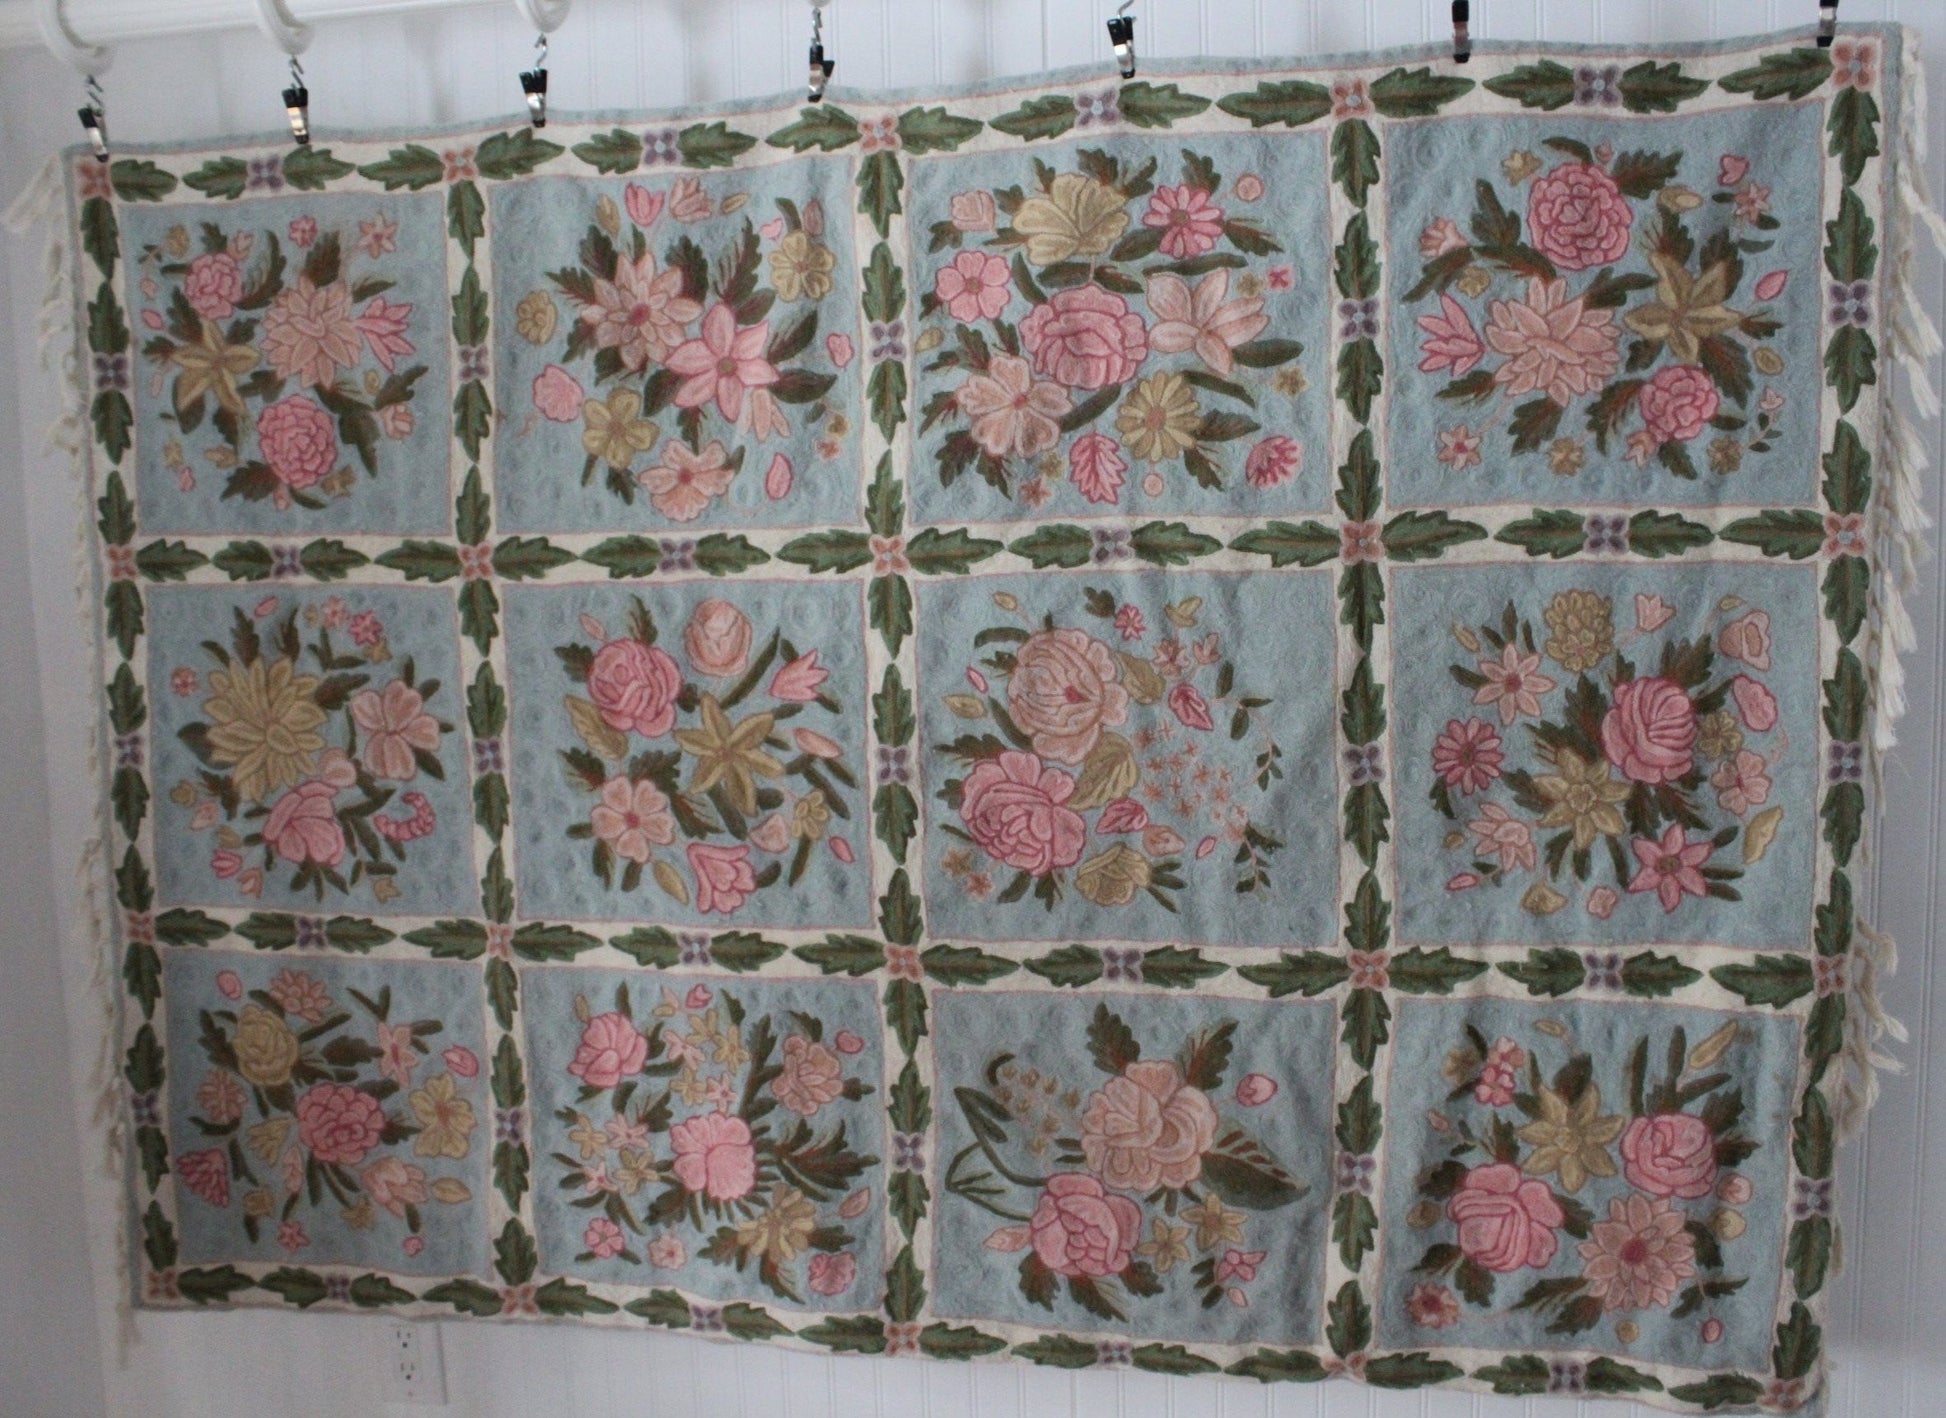 Pastel Floral Rug Large 47" X 68" Crewel Chainstitch Embroidered